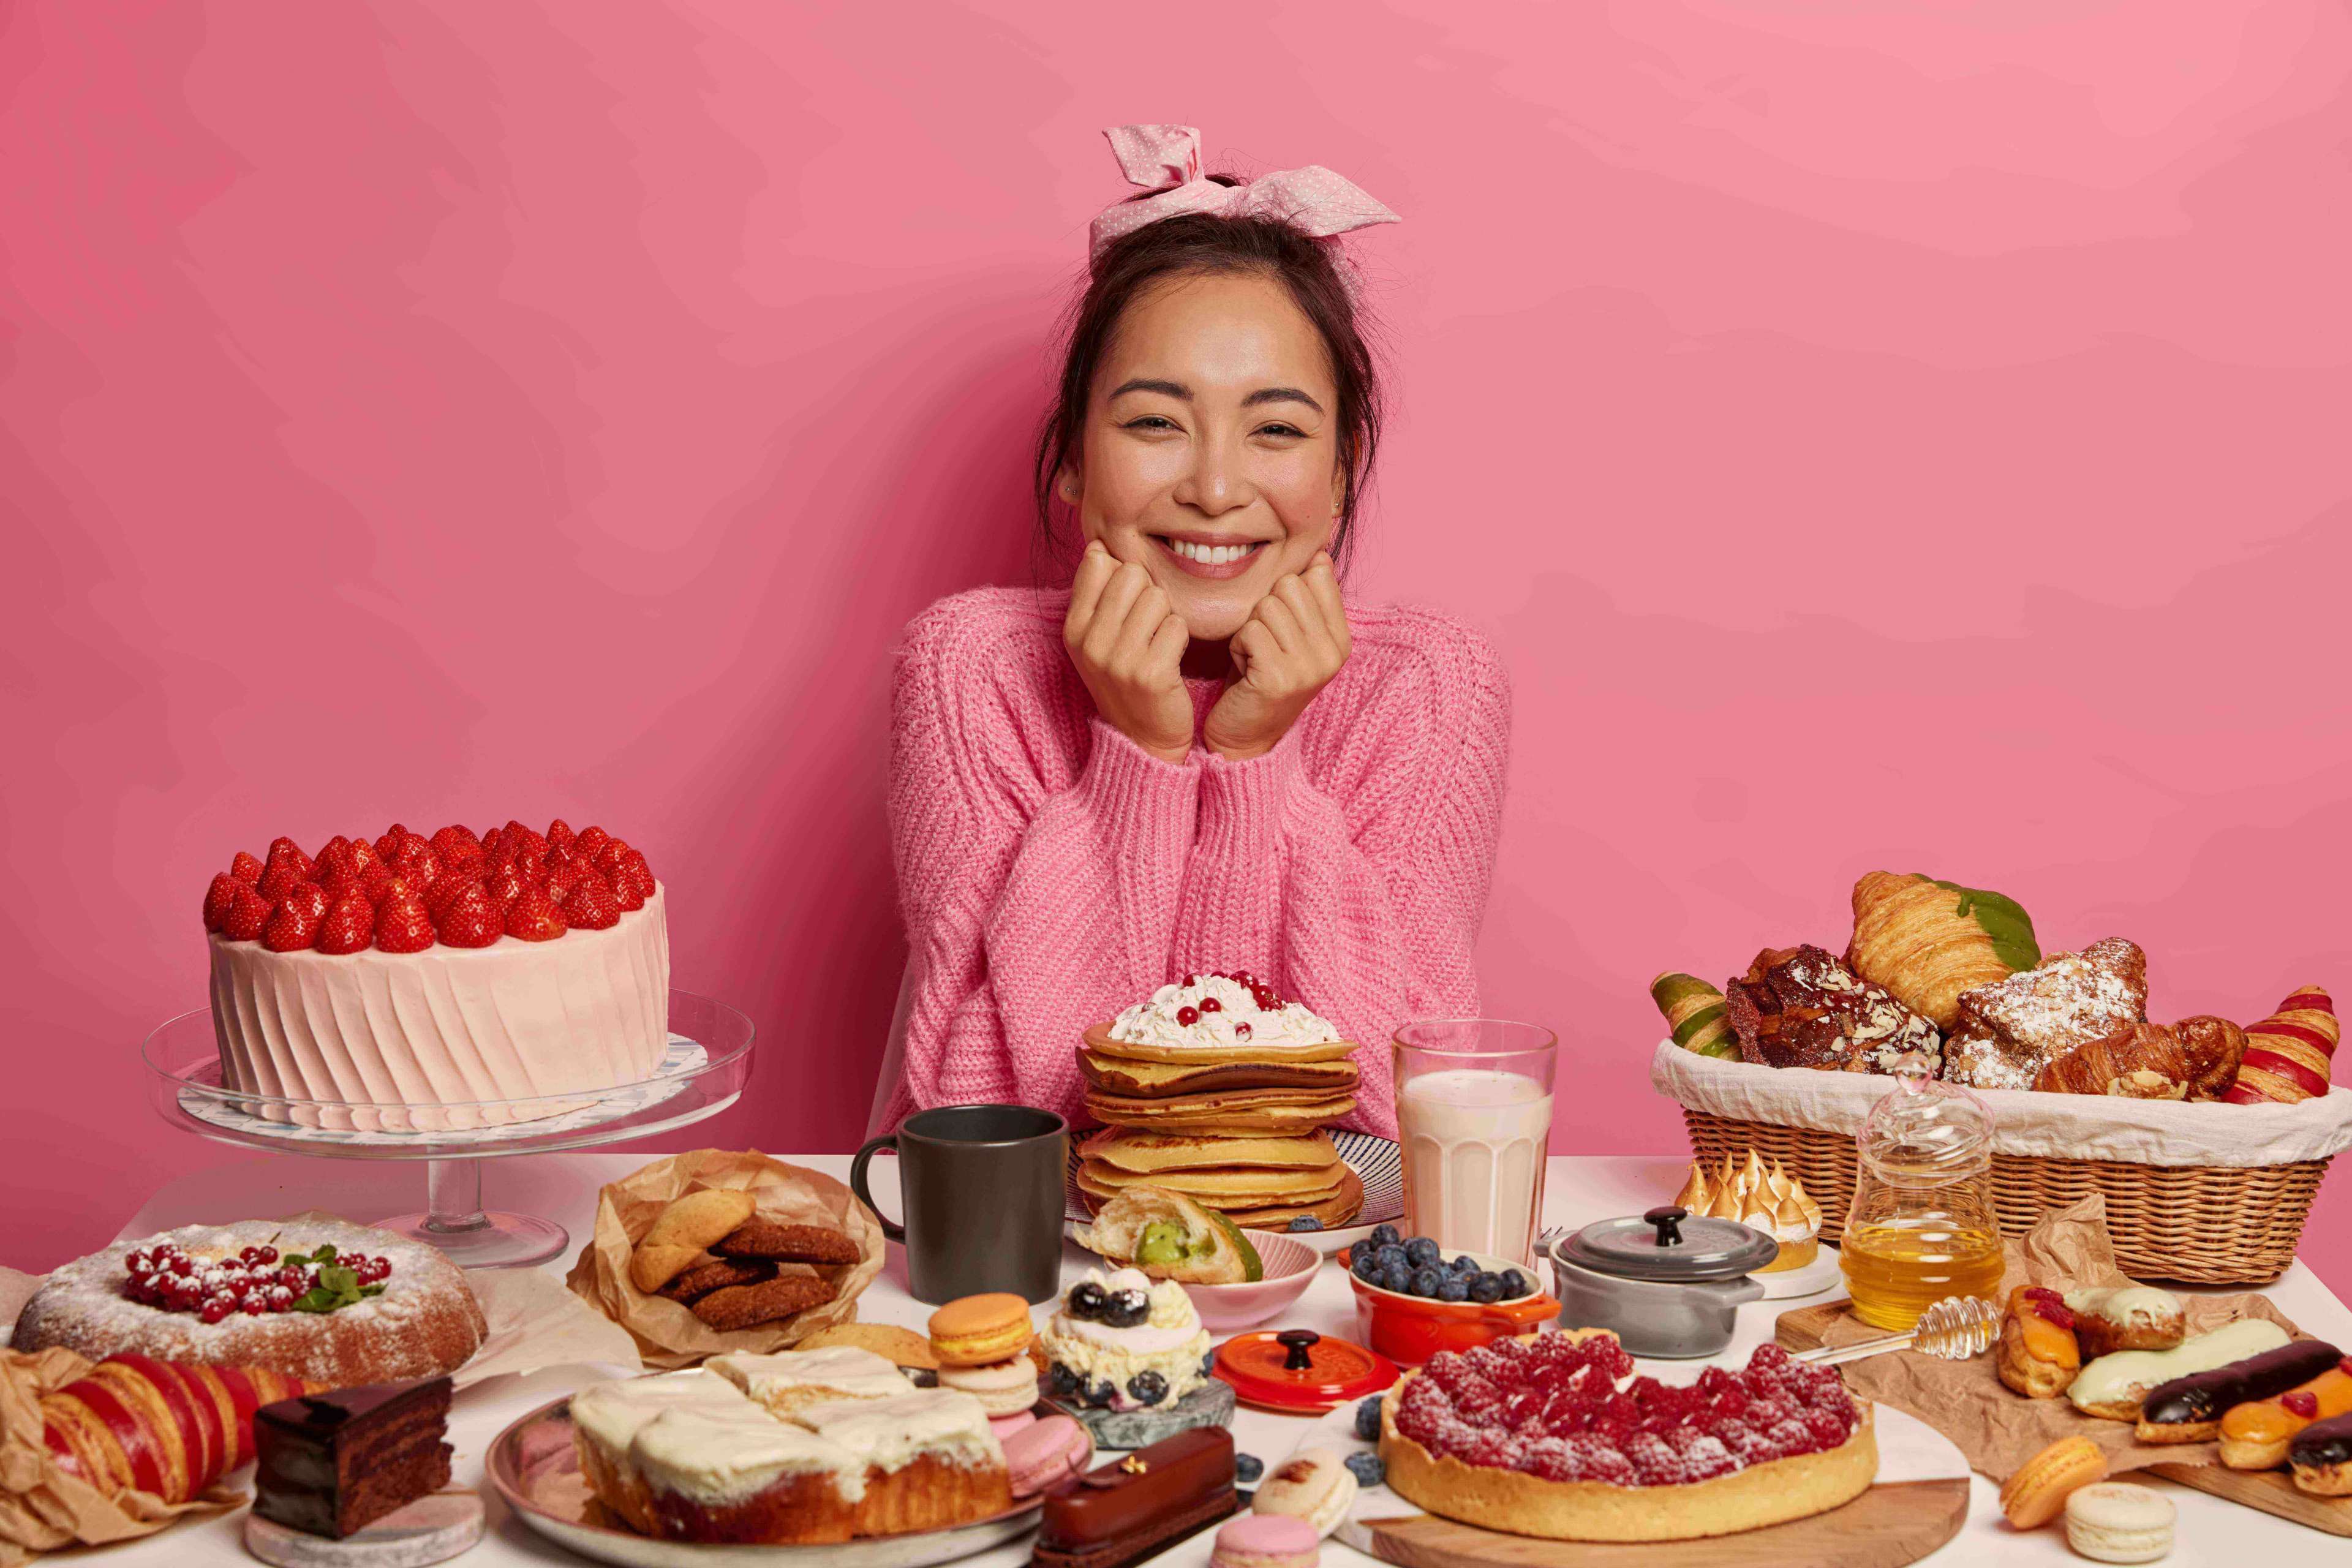 Woman smiling with desserts and food infront